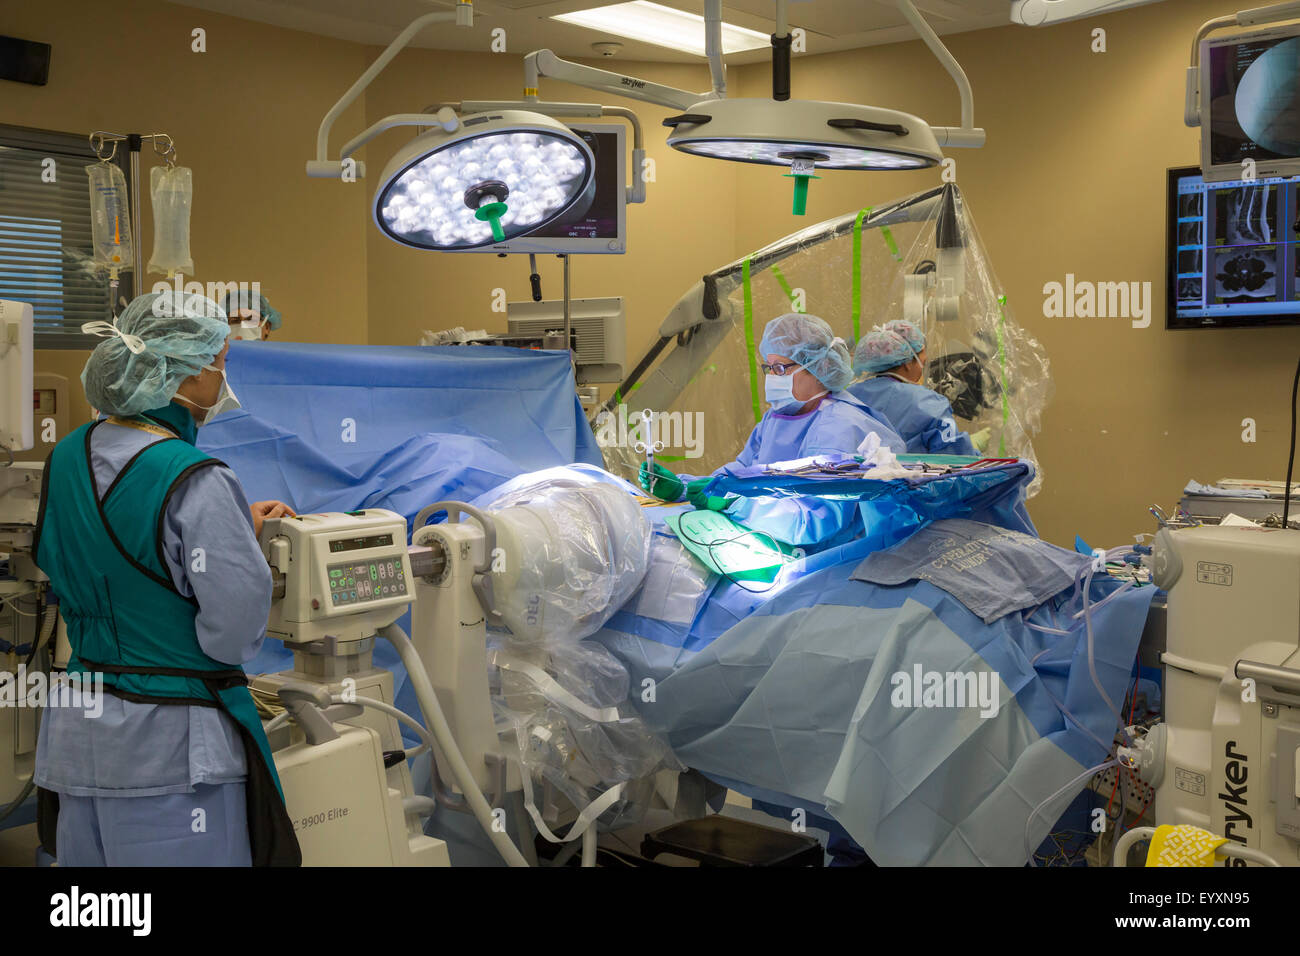 Englewood, Colorado - A surgical team prepares for minimally invasive lumbar spine surgery at Swedish Medical Center. Stock Photo